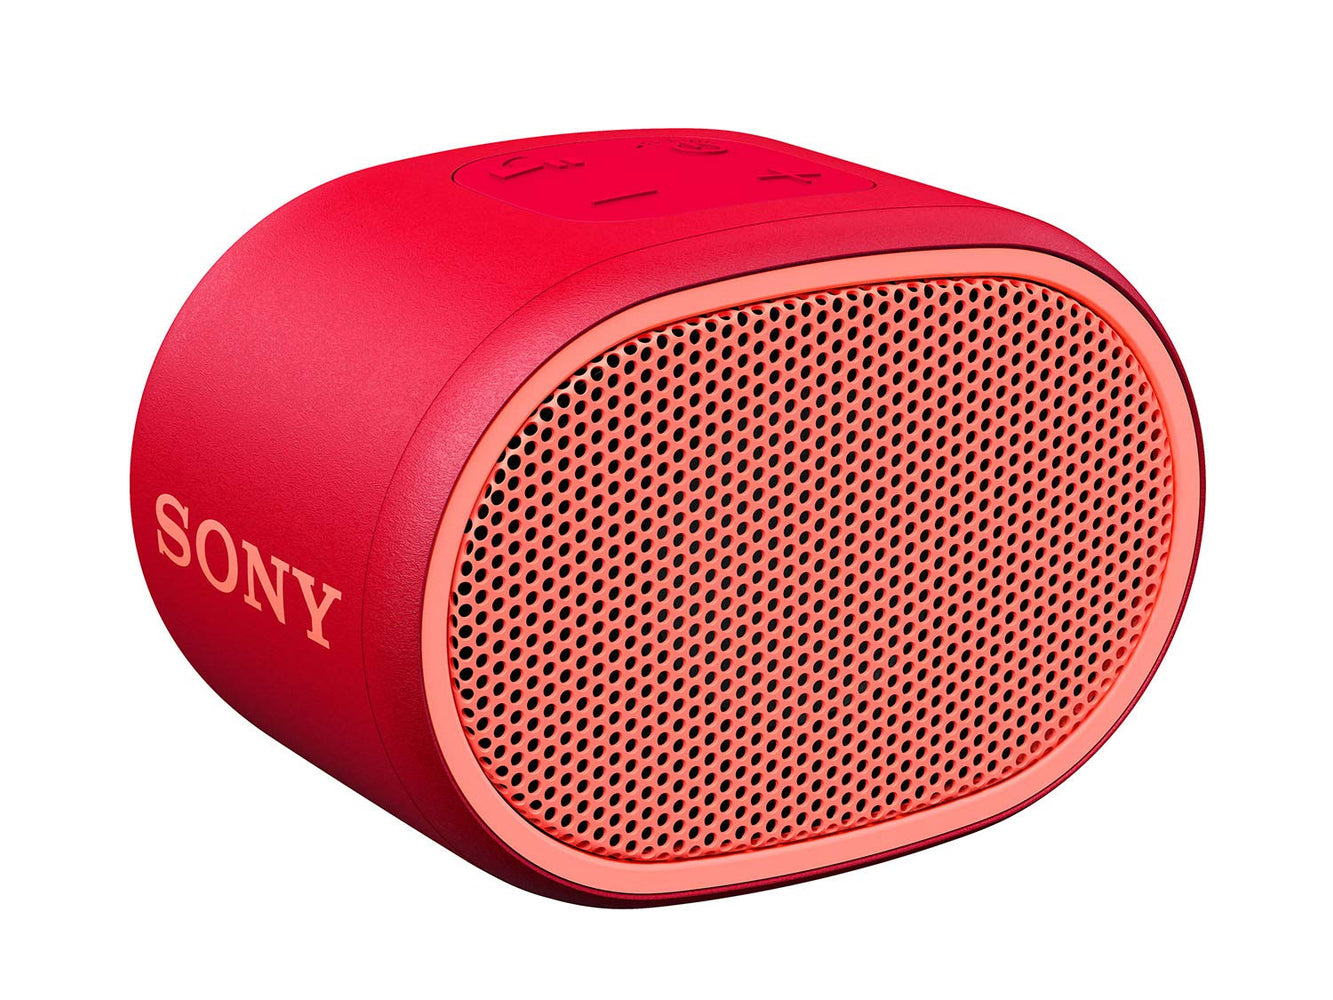 Sony SRS-XB01 Wireless Extra Bass Bluetooth Speaker with 6 Hours Battery Life (Red)